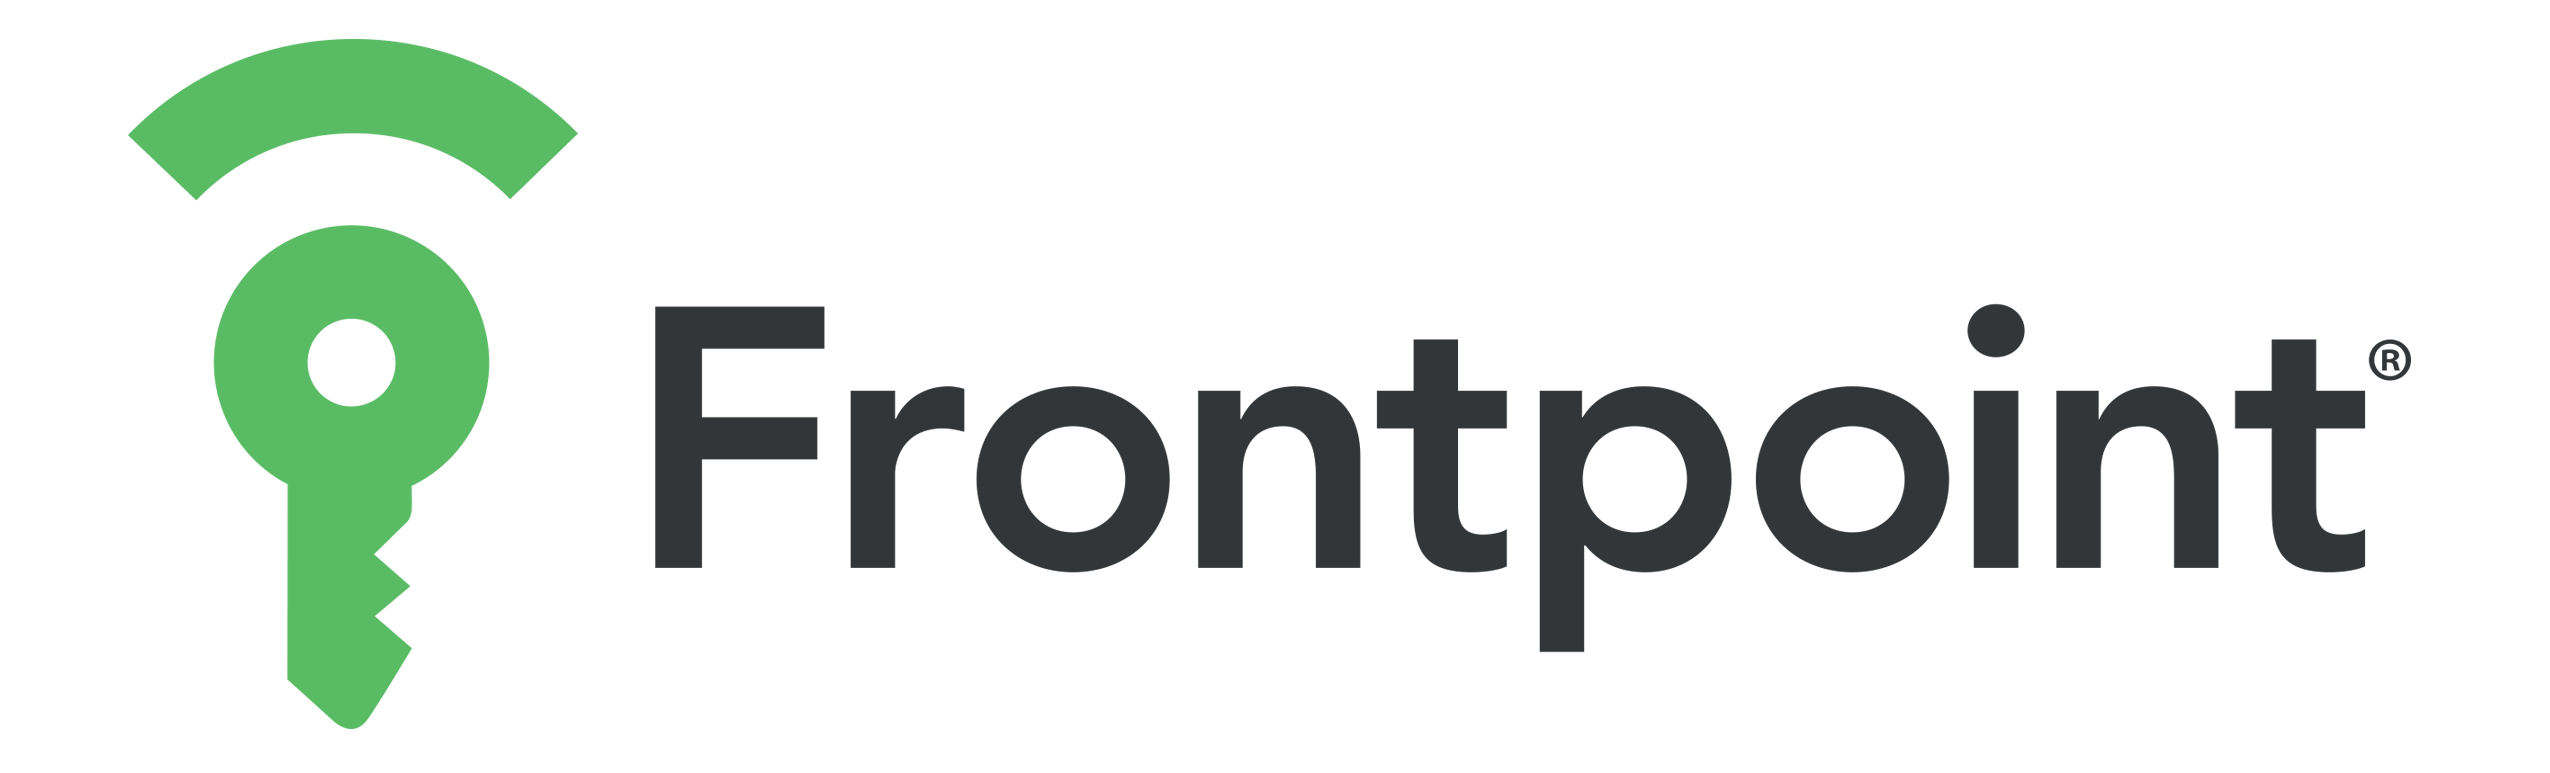 Frontpoint Home Security Review